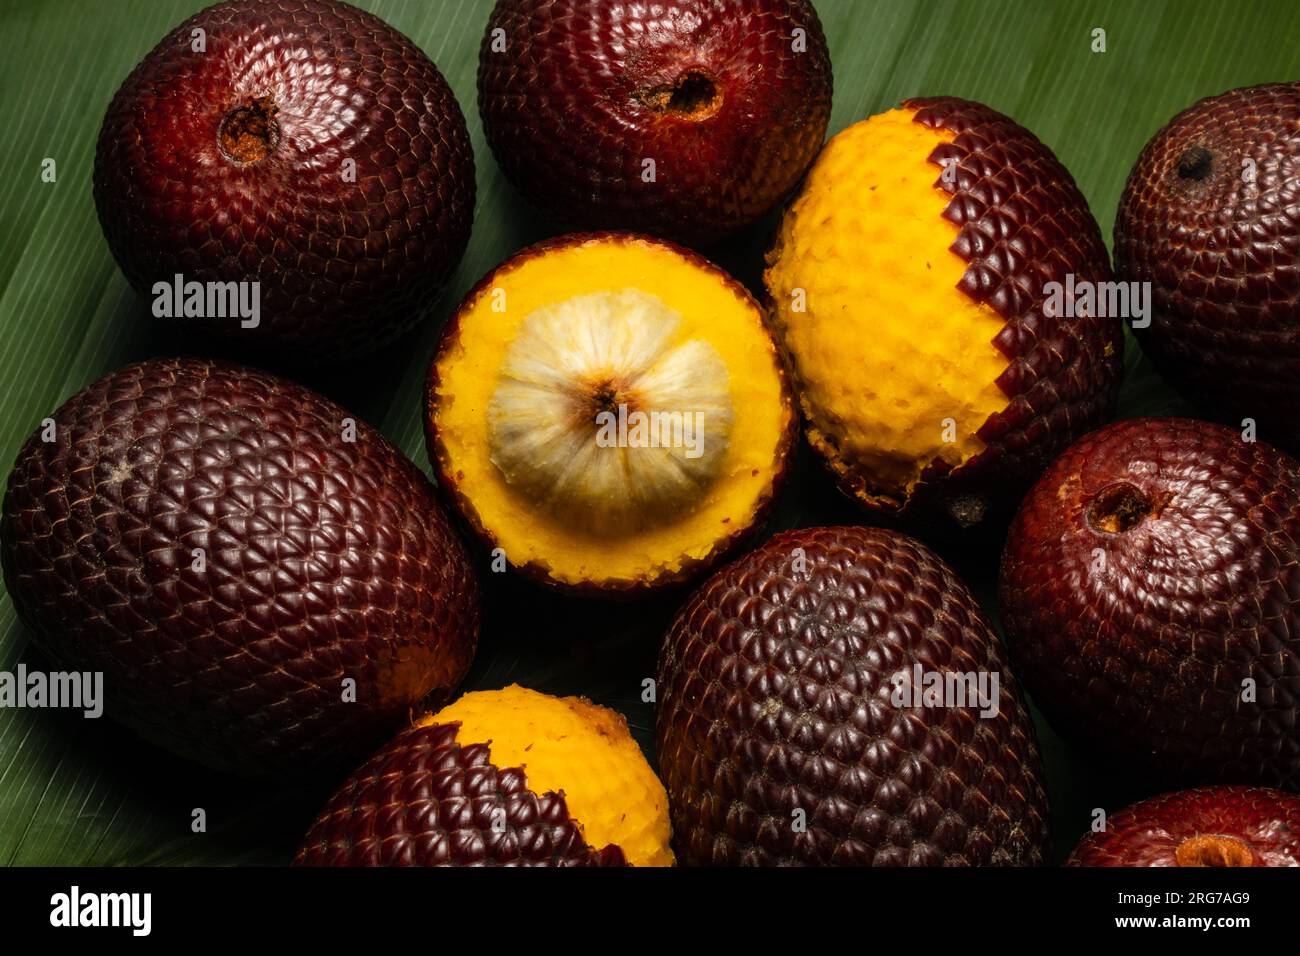 Buruti is a fruit widely consumed in the Amazon, it is nutritious and has many properties that make it very delicious. Stock Photo